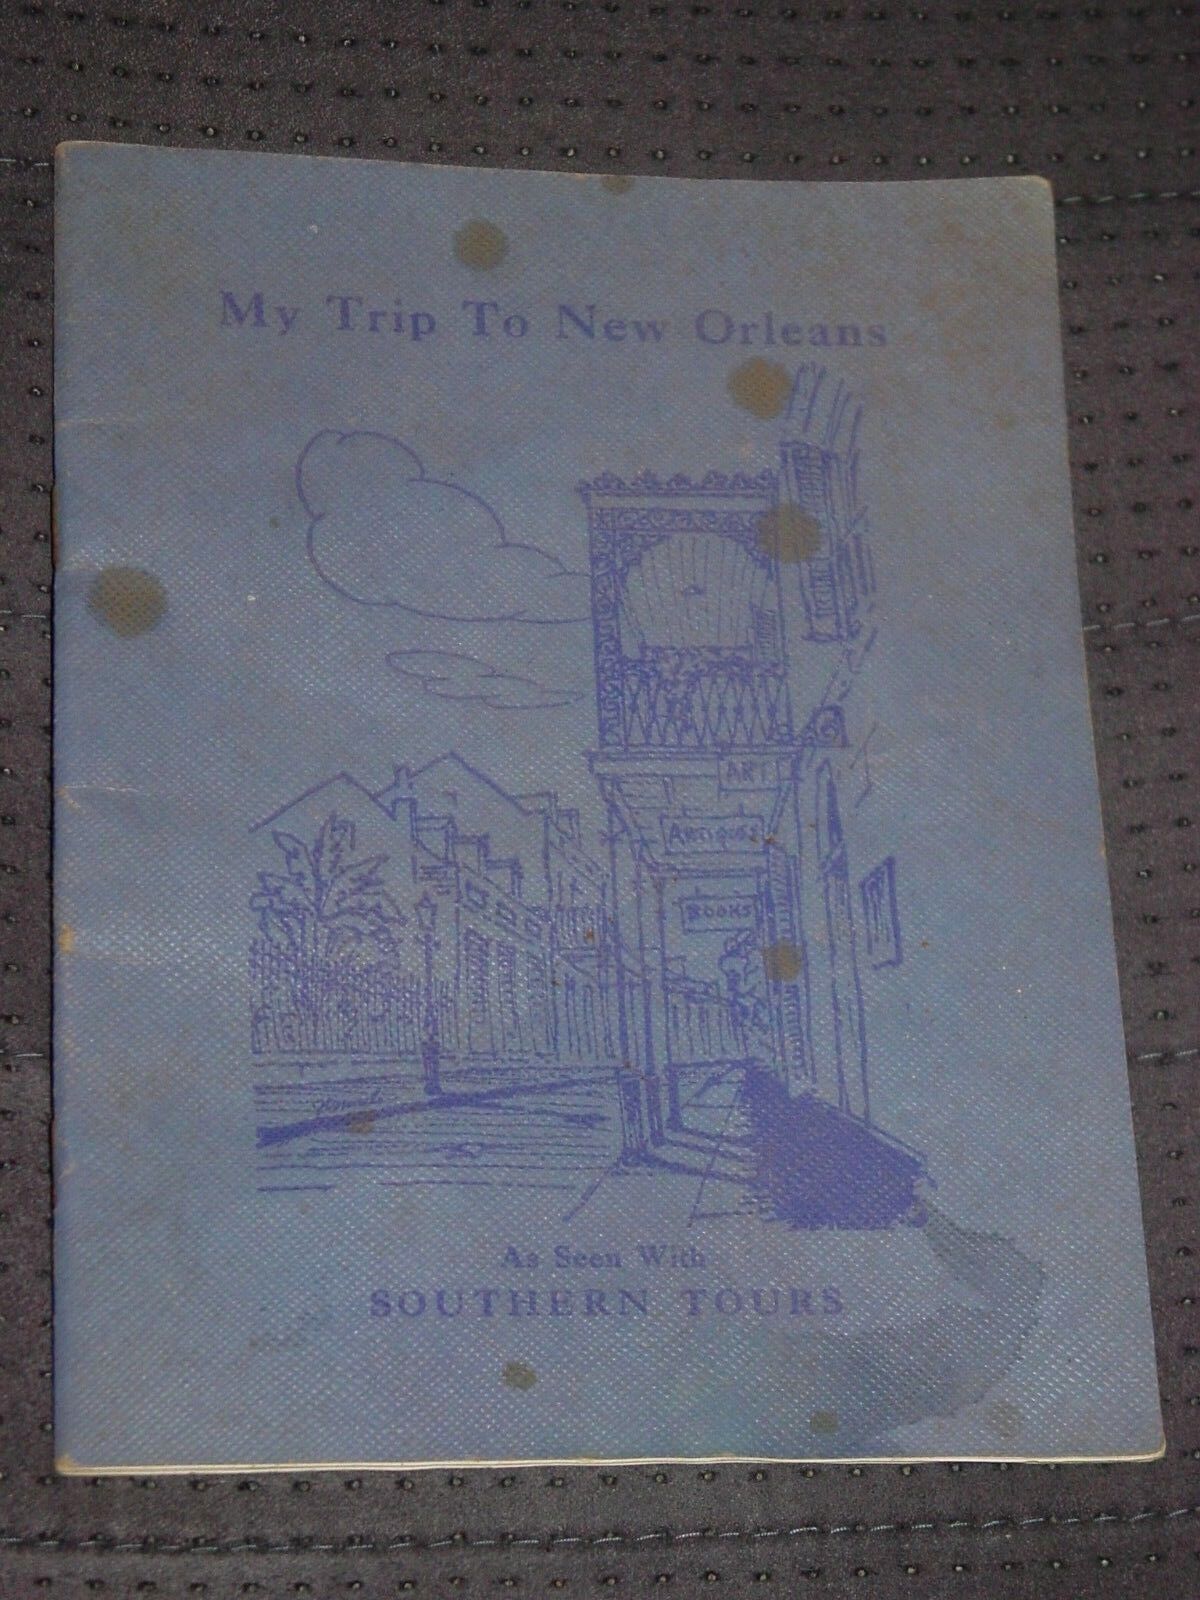 1941 Vintage My Trip To New Orleans: As seen with Southern Tours